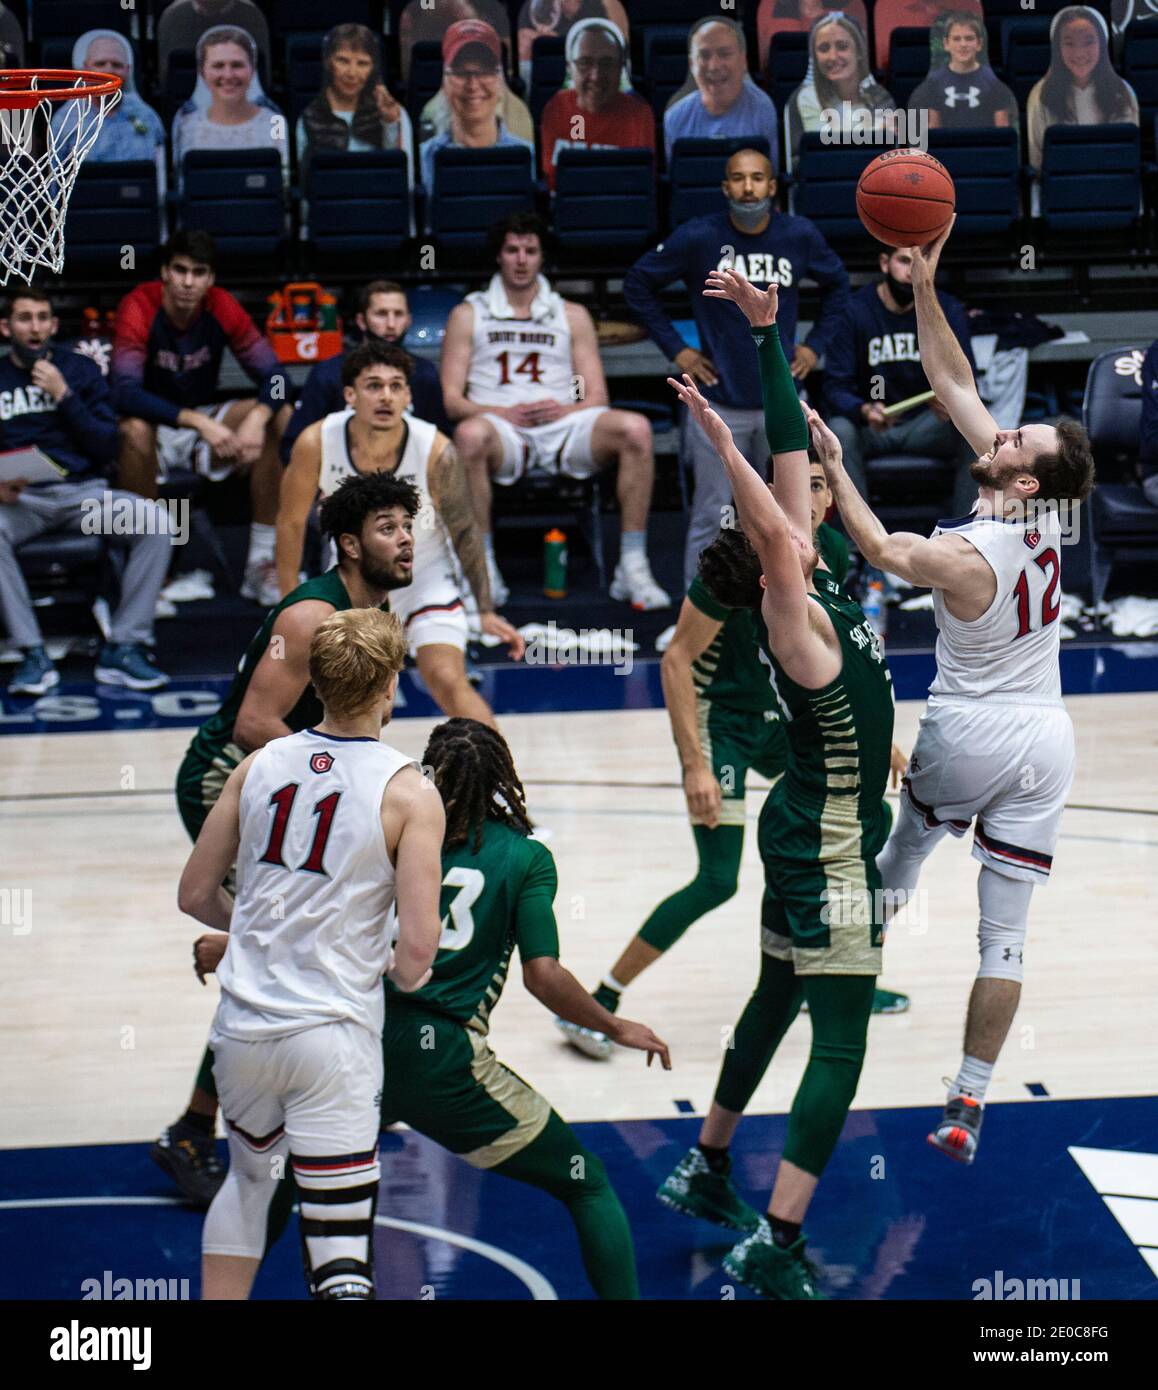 Moraga, CA U.S. 30th Dec, 2020. A. St. Mary's Gaels guard Tommy Kuhse (12) drives to the basket during the NCAA Men's Basketball game between Sacramento State Hornets and the Saint Mary's Gaels 63-45 win at McKeon Pavilion Moraga Calif. Thurman James/CSM/Alamy Live News Stock Photo